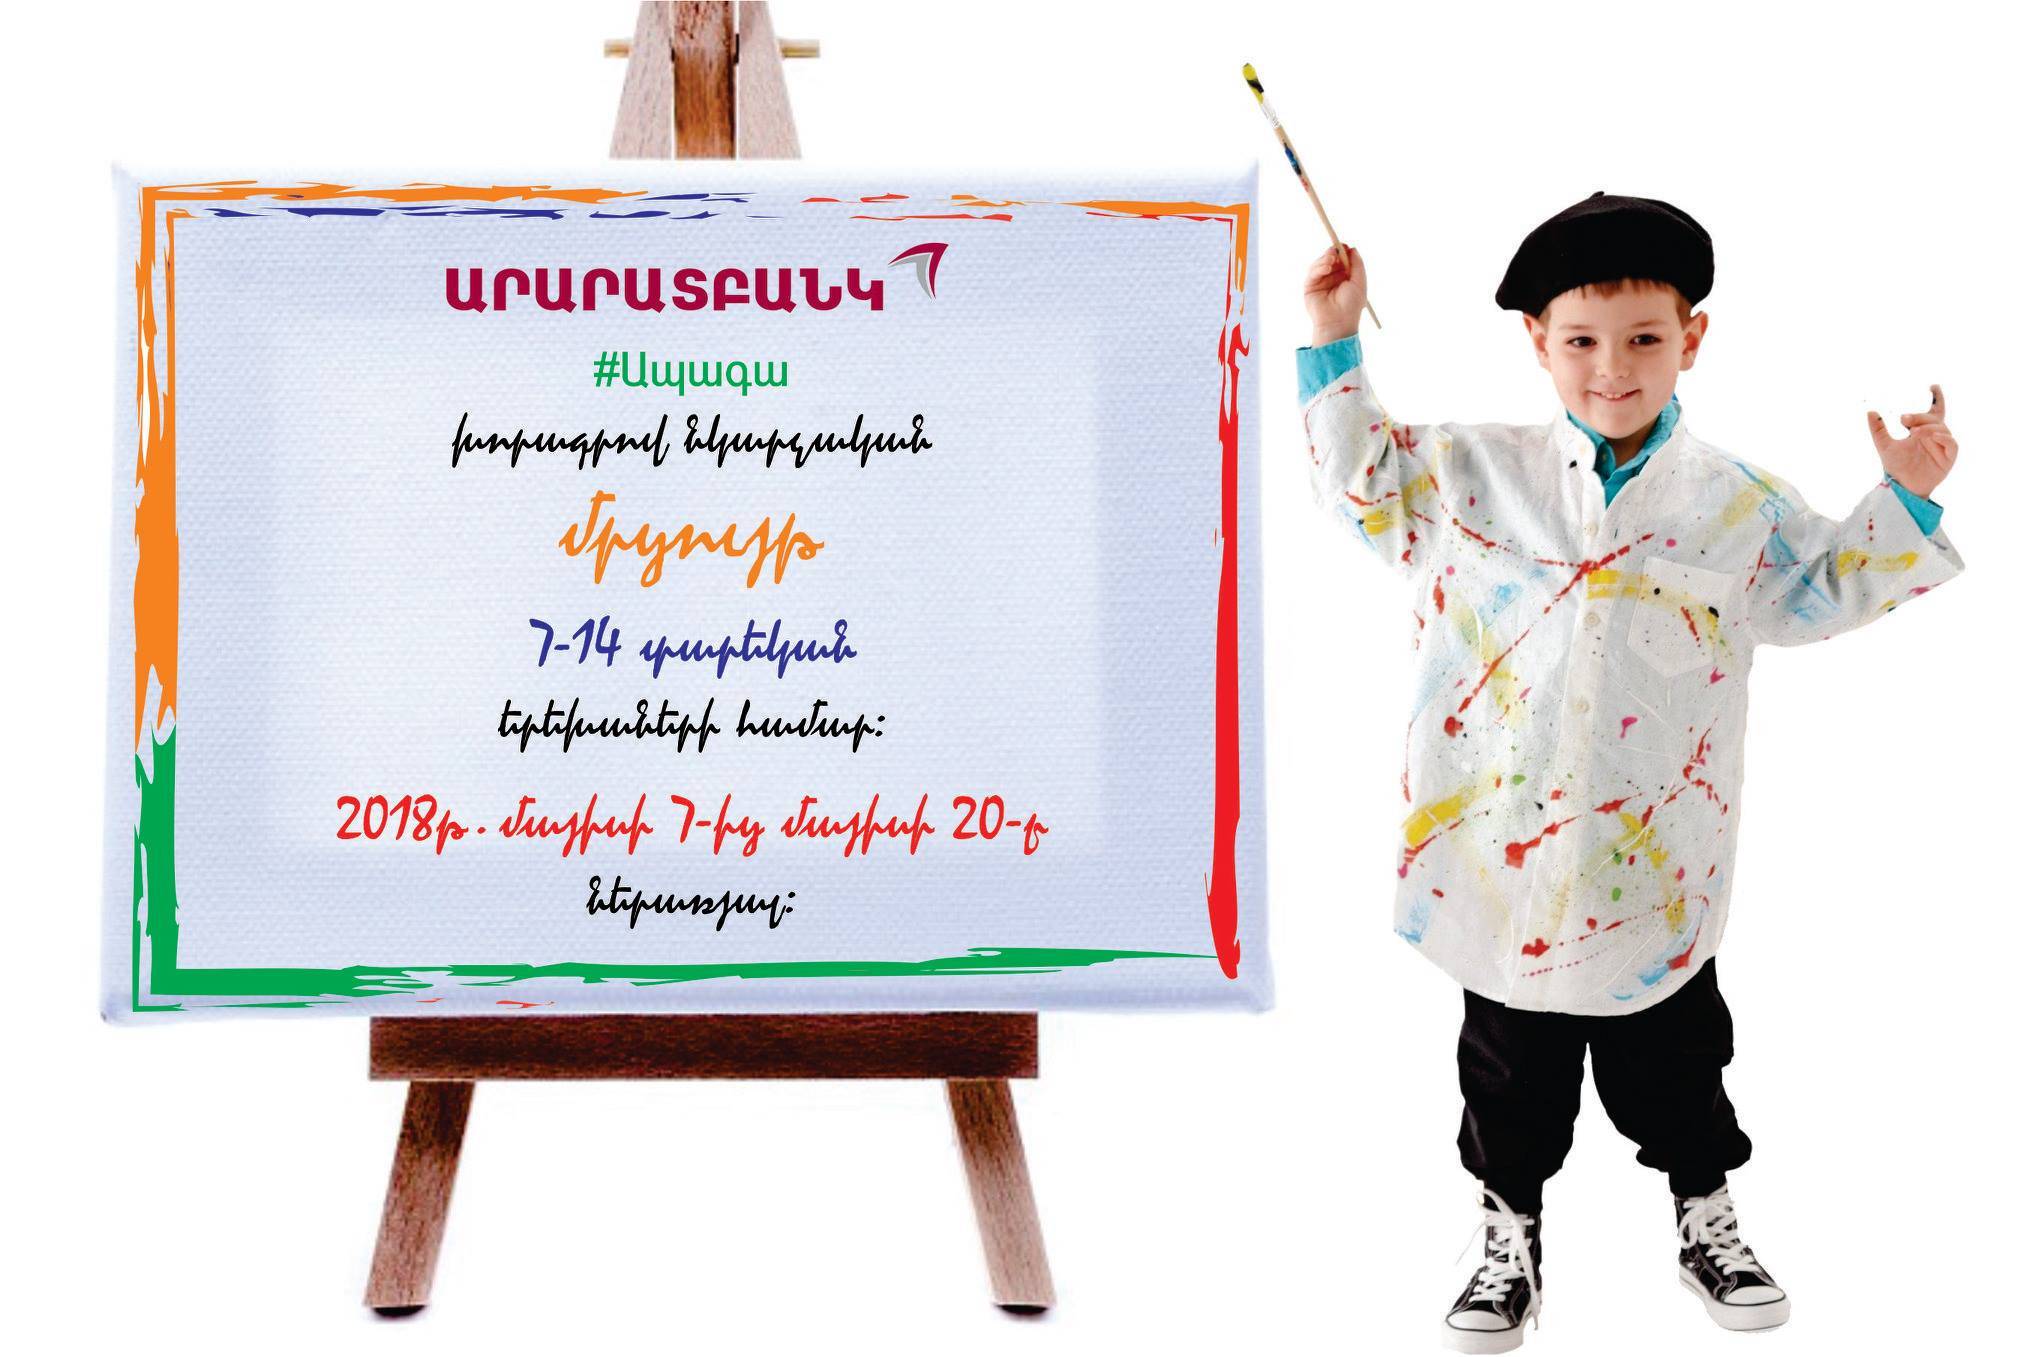 Painting competition for children